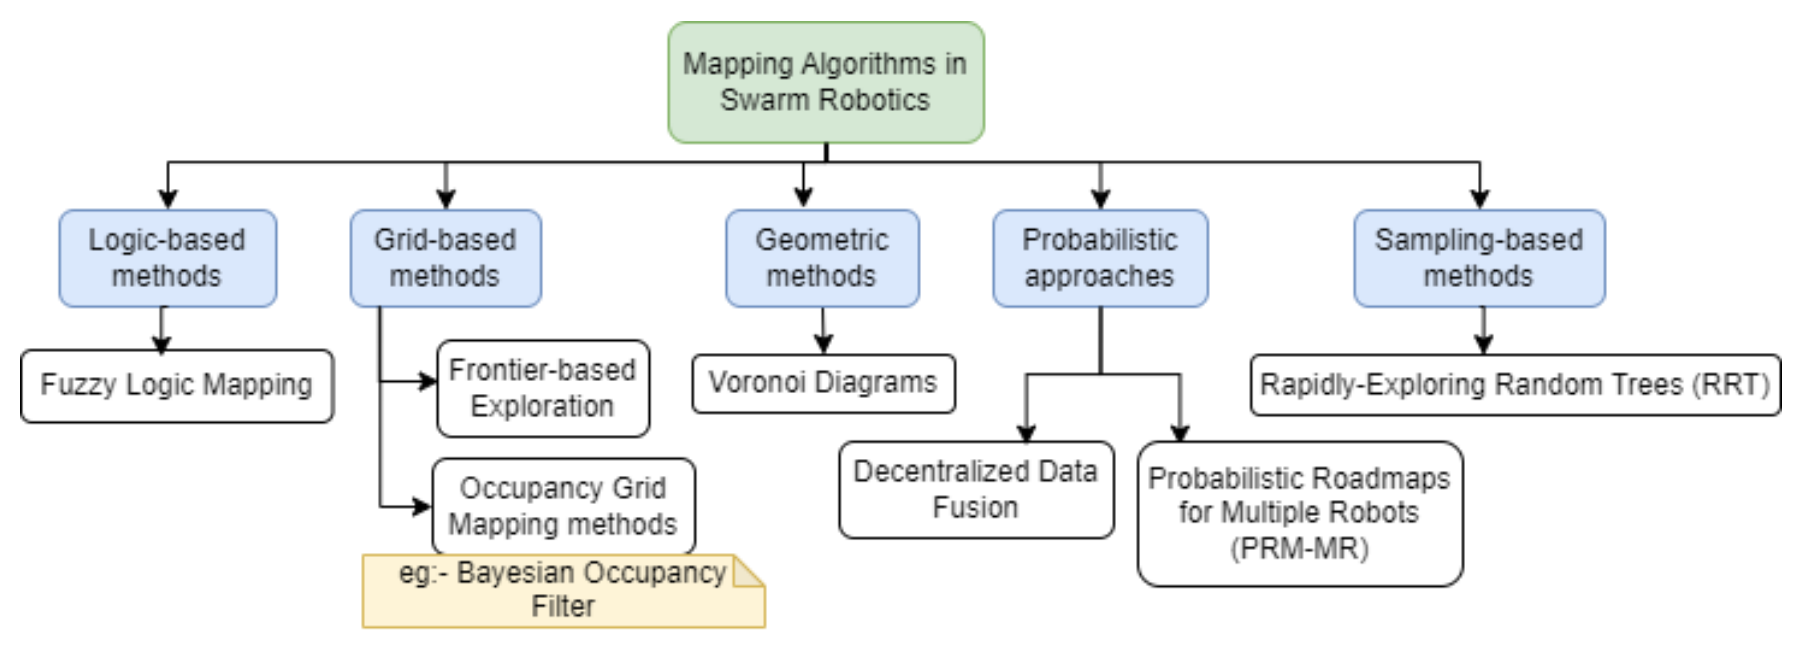 Fig. Some famous mapping algorithms in swarm robotics